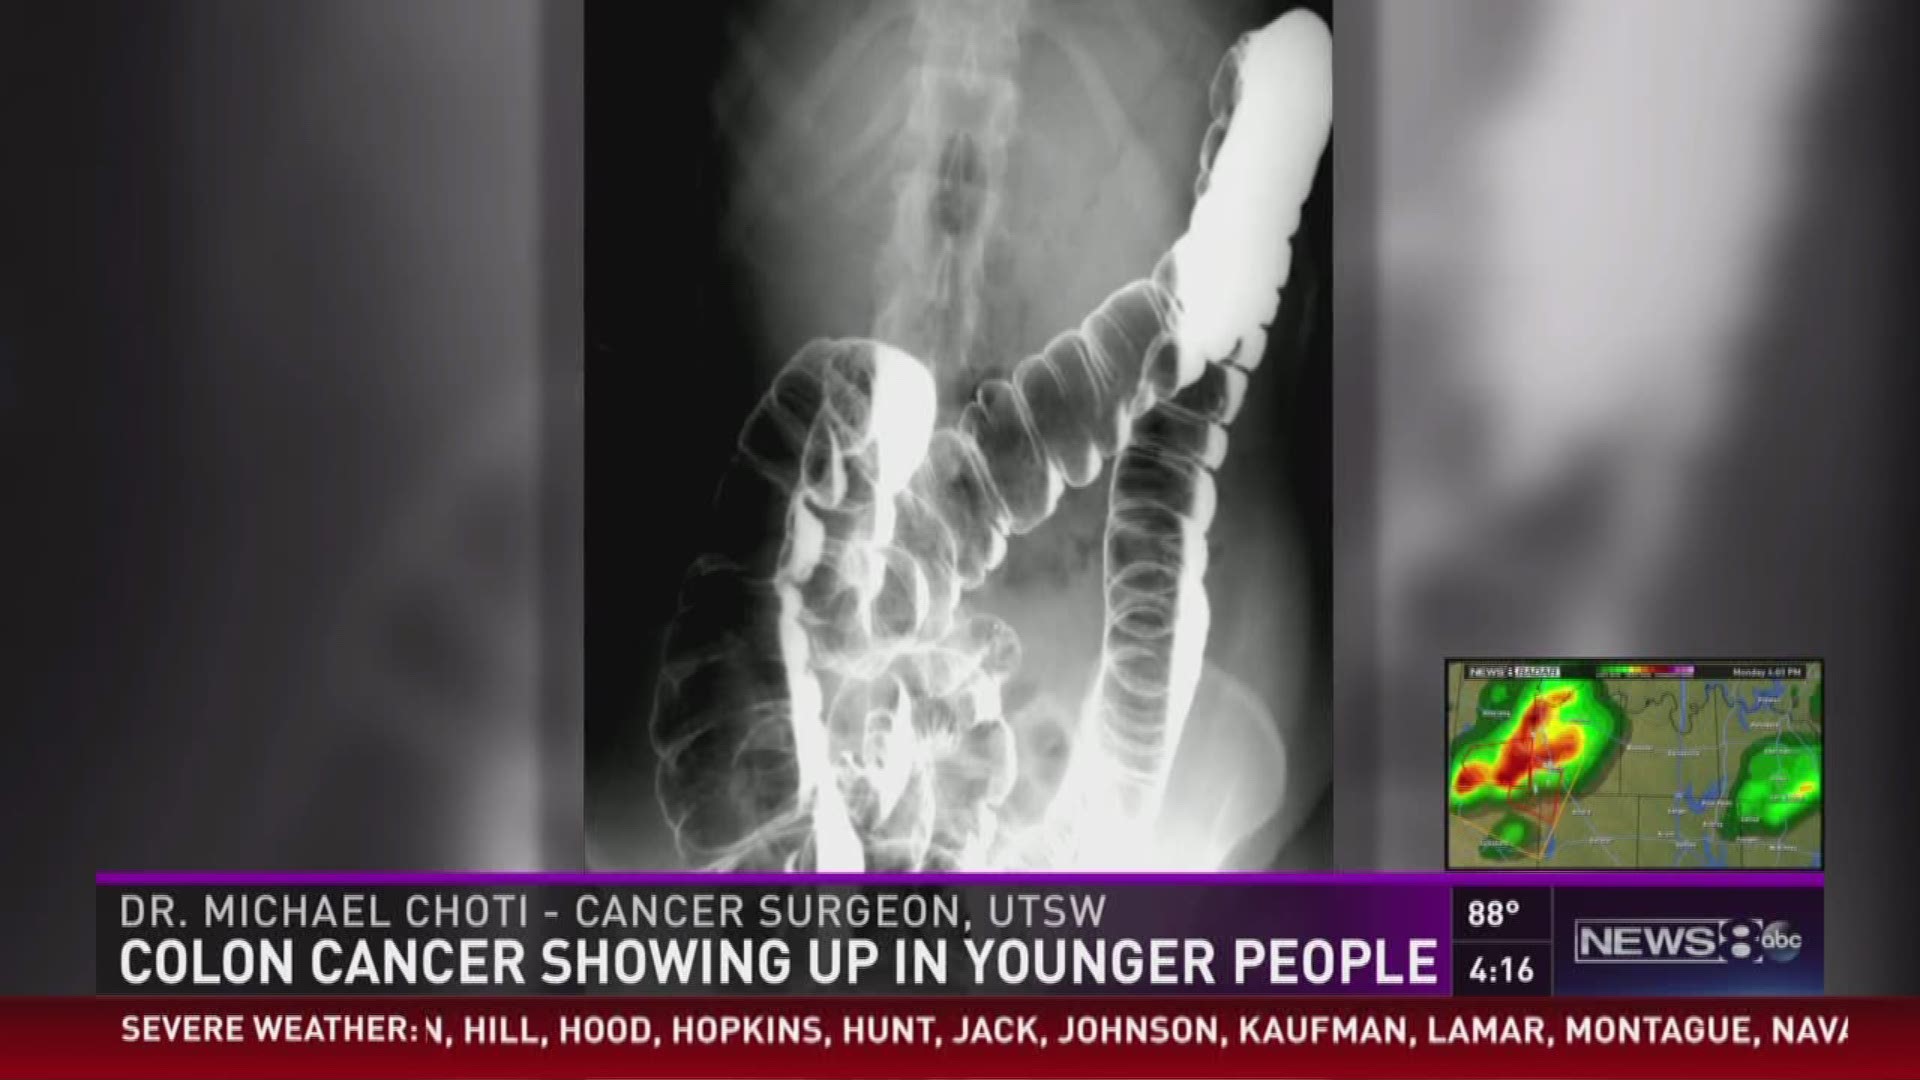 Studies are finding a greater percentage of colon cancer patients are under age 50.